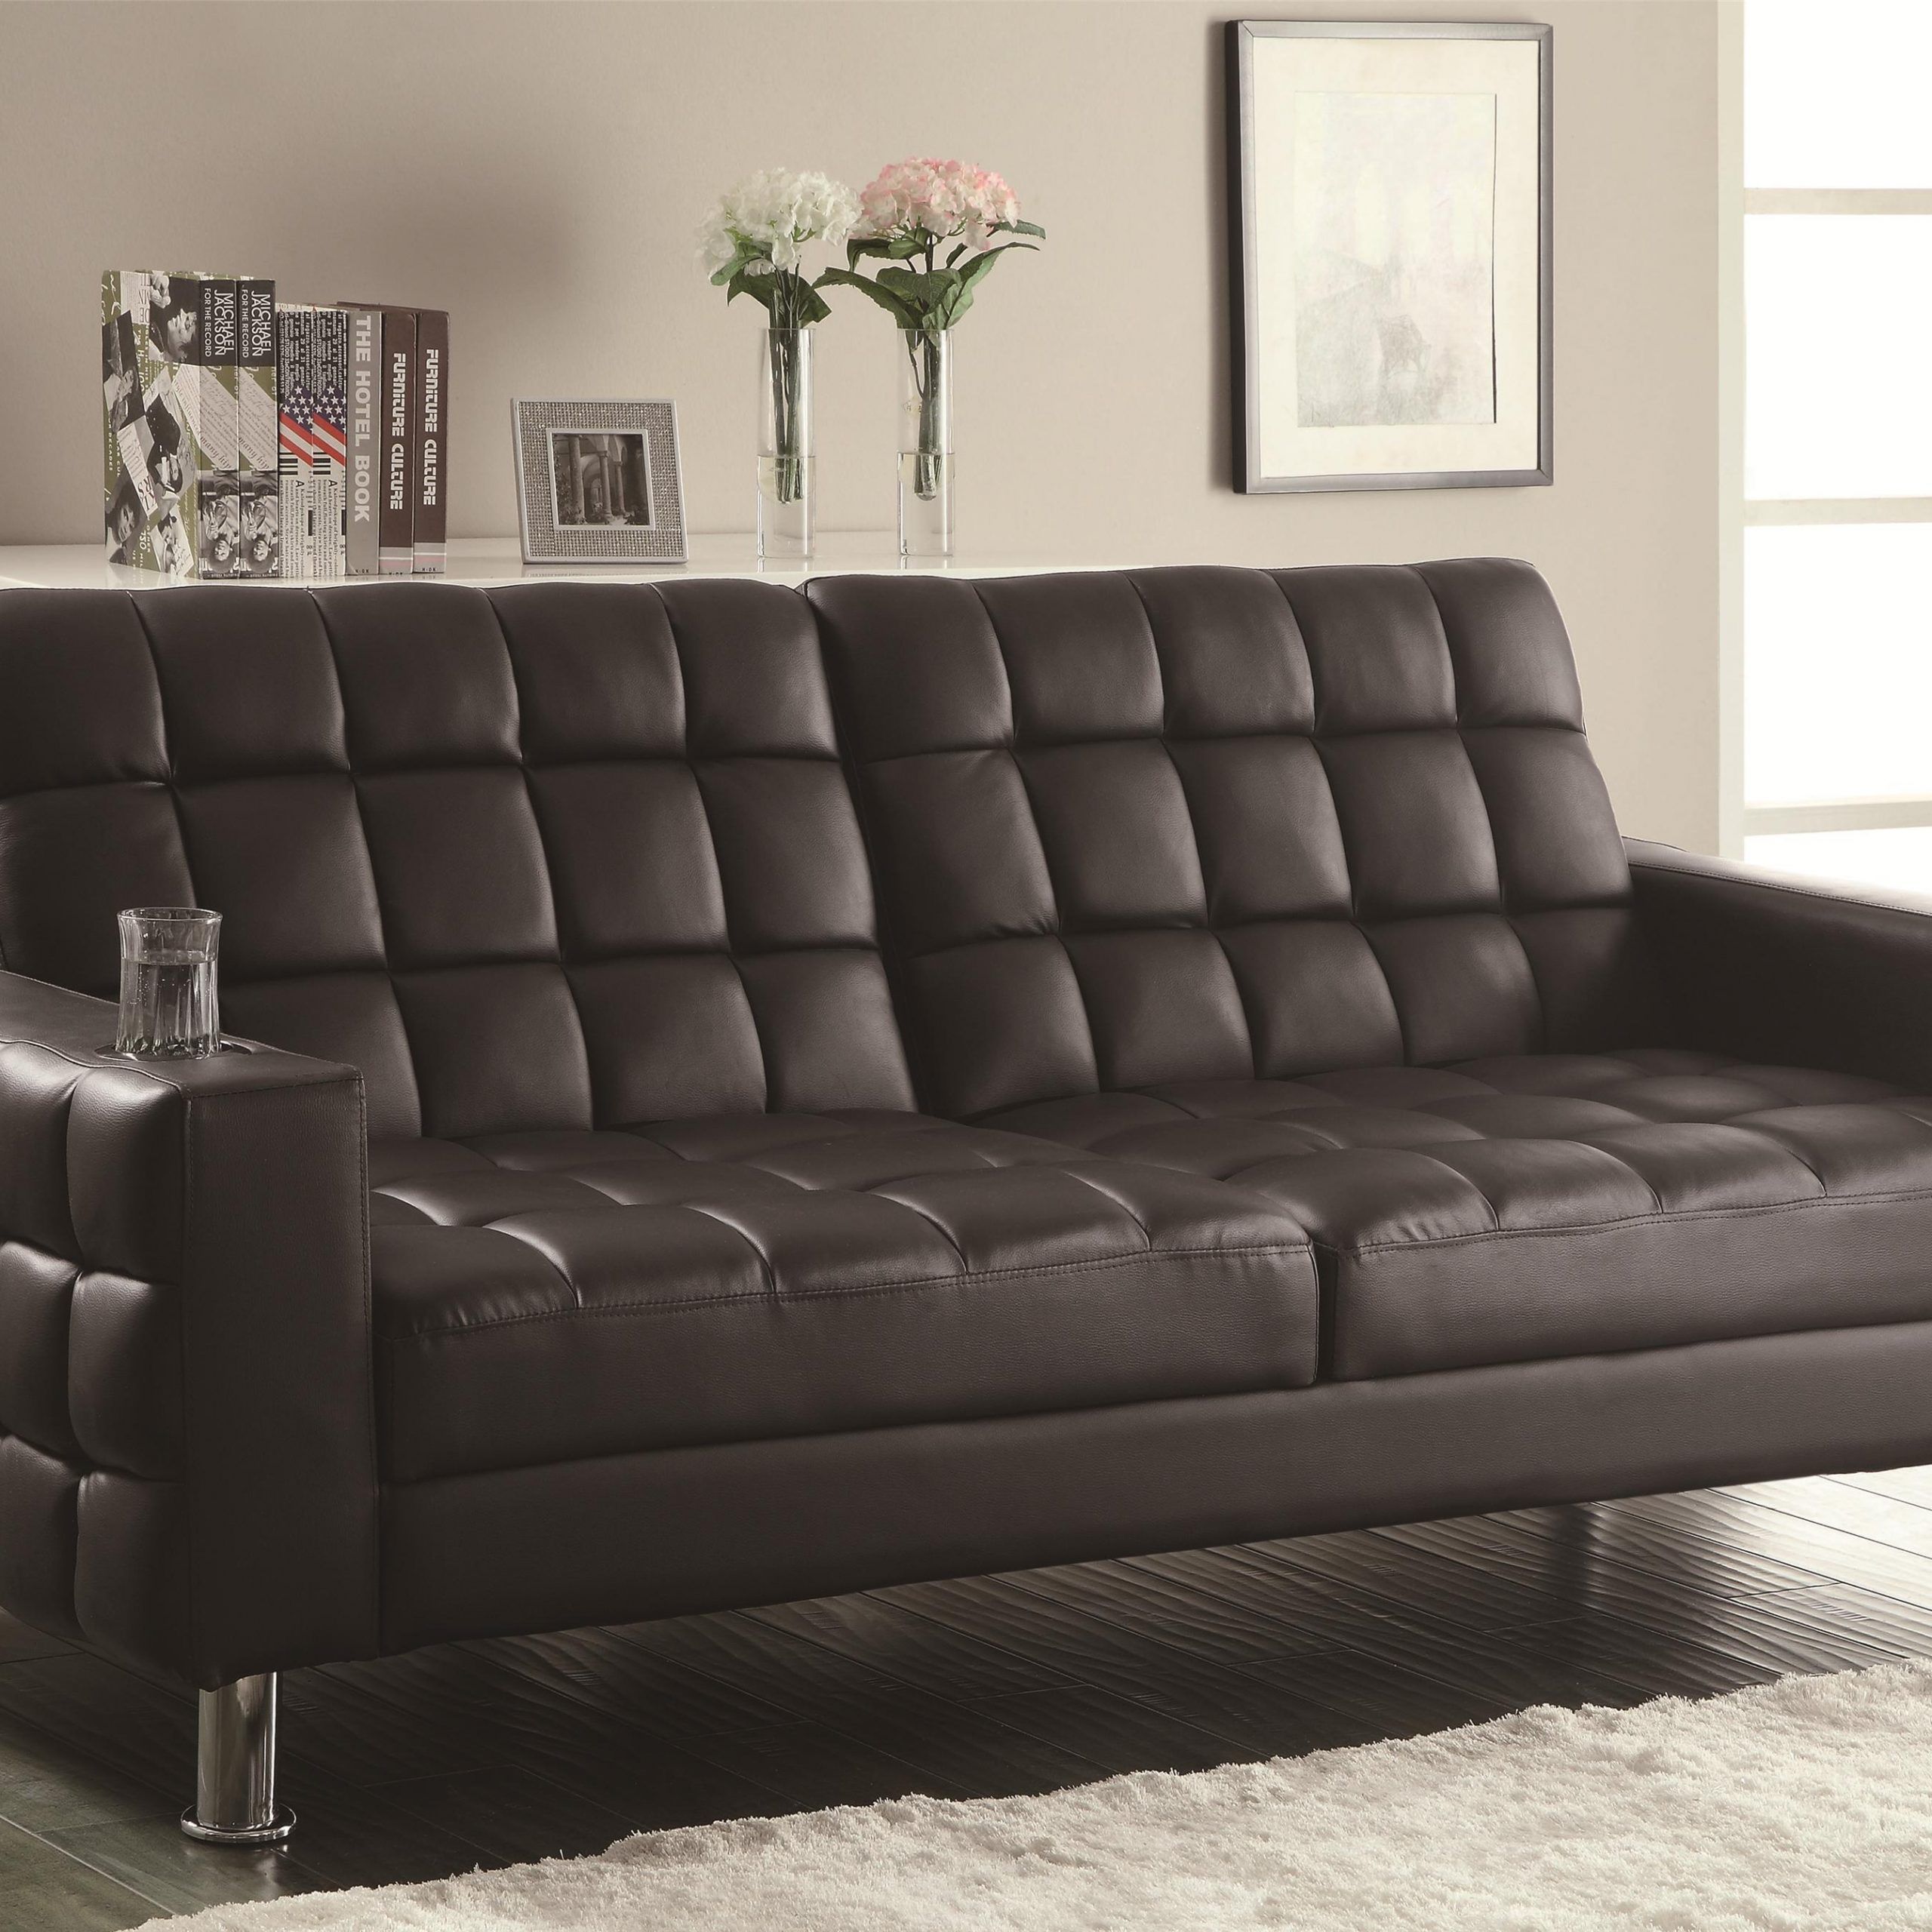 Coaster Sofa Beds And Futons Adjustable Sofa Bed With Cup With Prato Storage Sectional Futon Sofas (View 7 of 15)